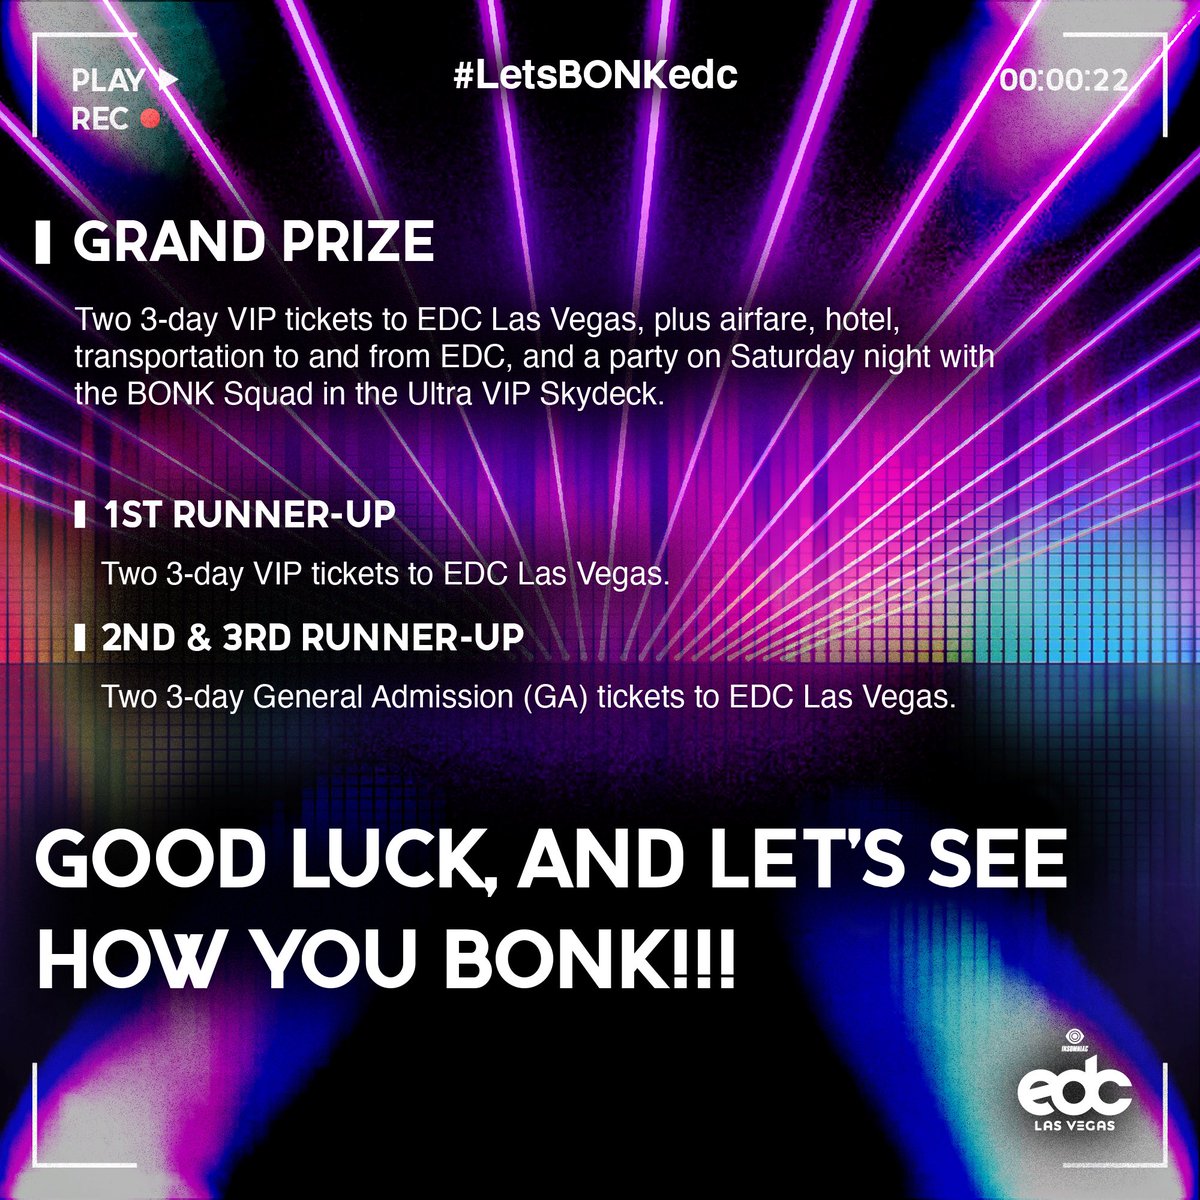 Want to come to EDC Las Vegas and bring a friend to party with the BONK Squad?👀 BONK and @sturdyco_ are teaming up to give out Eight 3-day passes to EDC Las Vegas, along with Air fare, Hotel, and Transportation to and from EDC for the Grand Prize winners❗️❗️❗️ How can you win?…